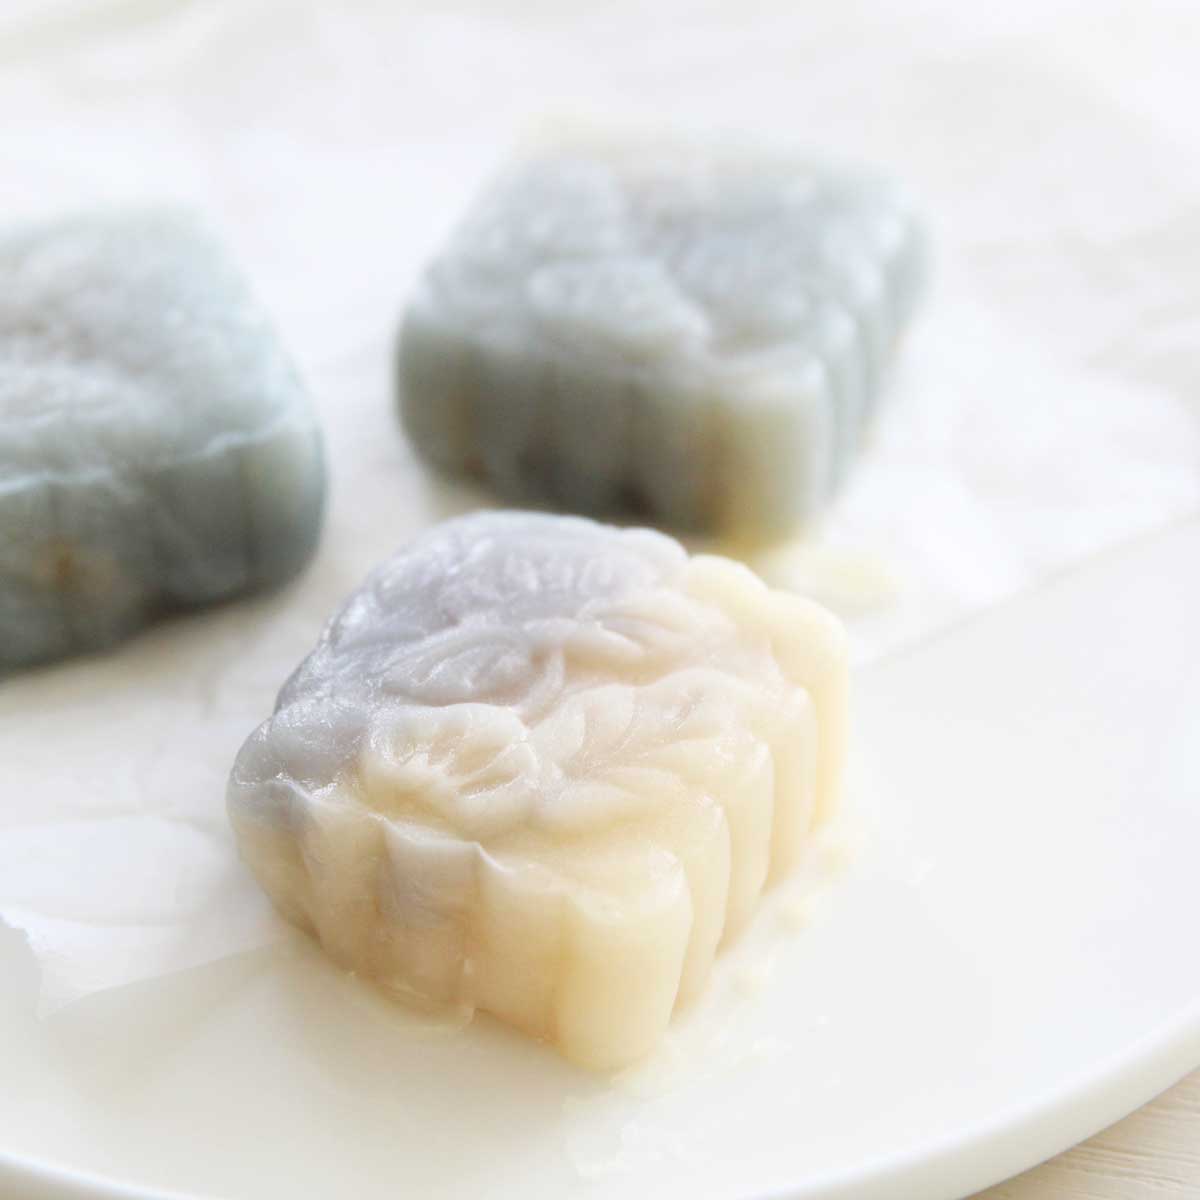 10 Minute Butterfly Pea Snowskin Mooncakes (No Steaming Required!) - cashew butter mooncakes